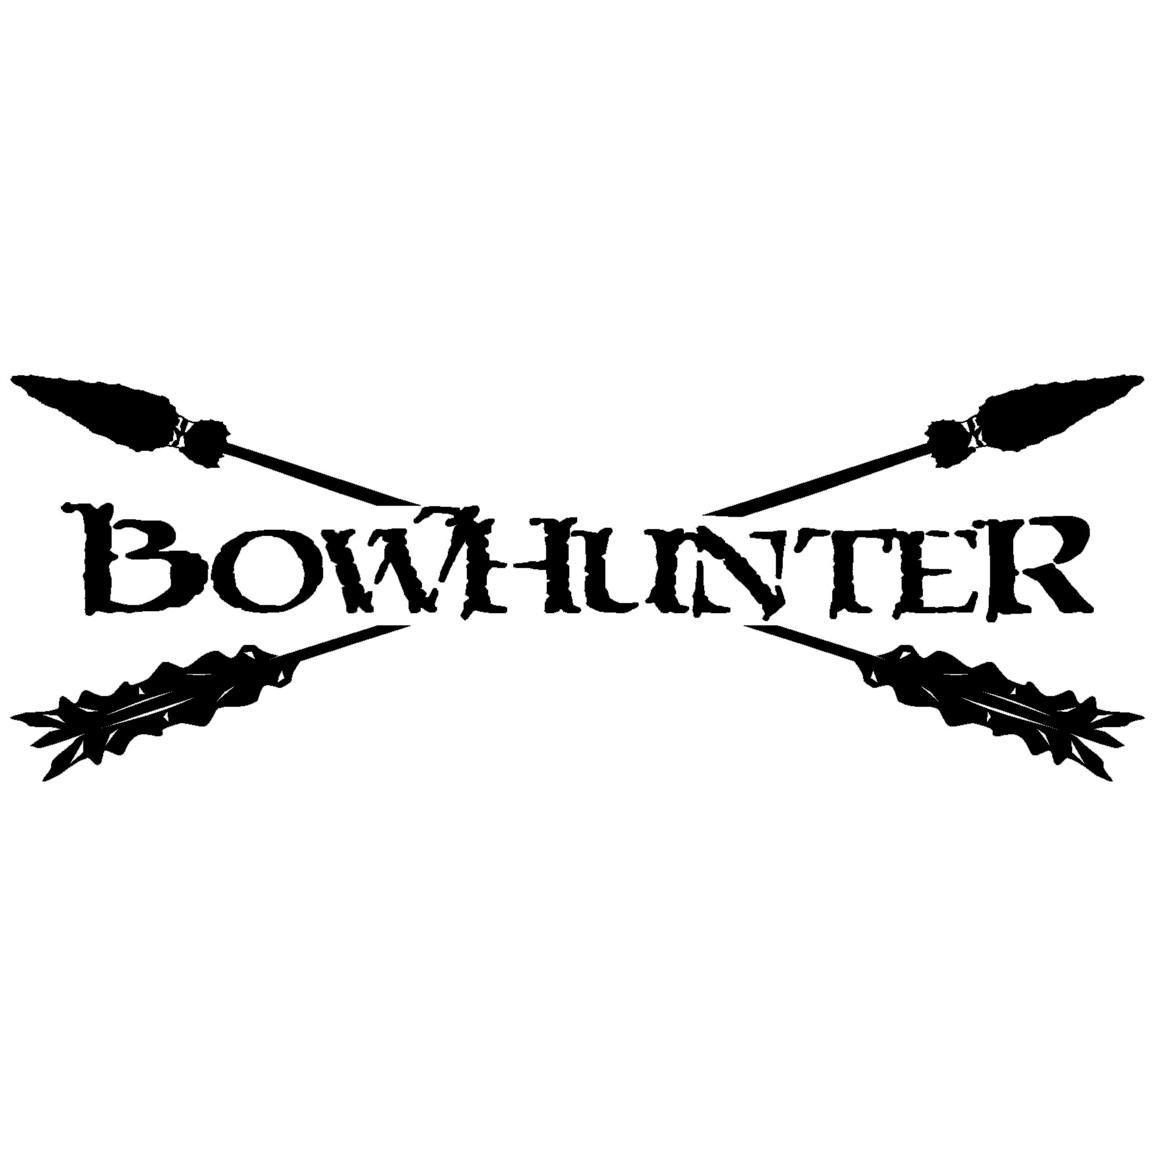 Bowhunter Logo - Rear Window bow hunting logo decals | outdoor decals bowhunter decal ...